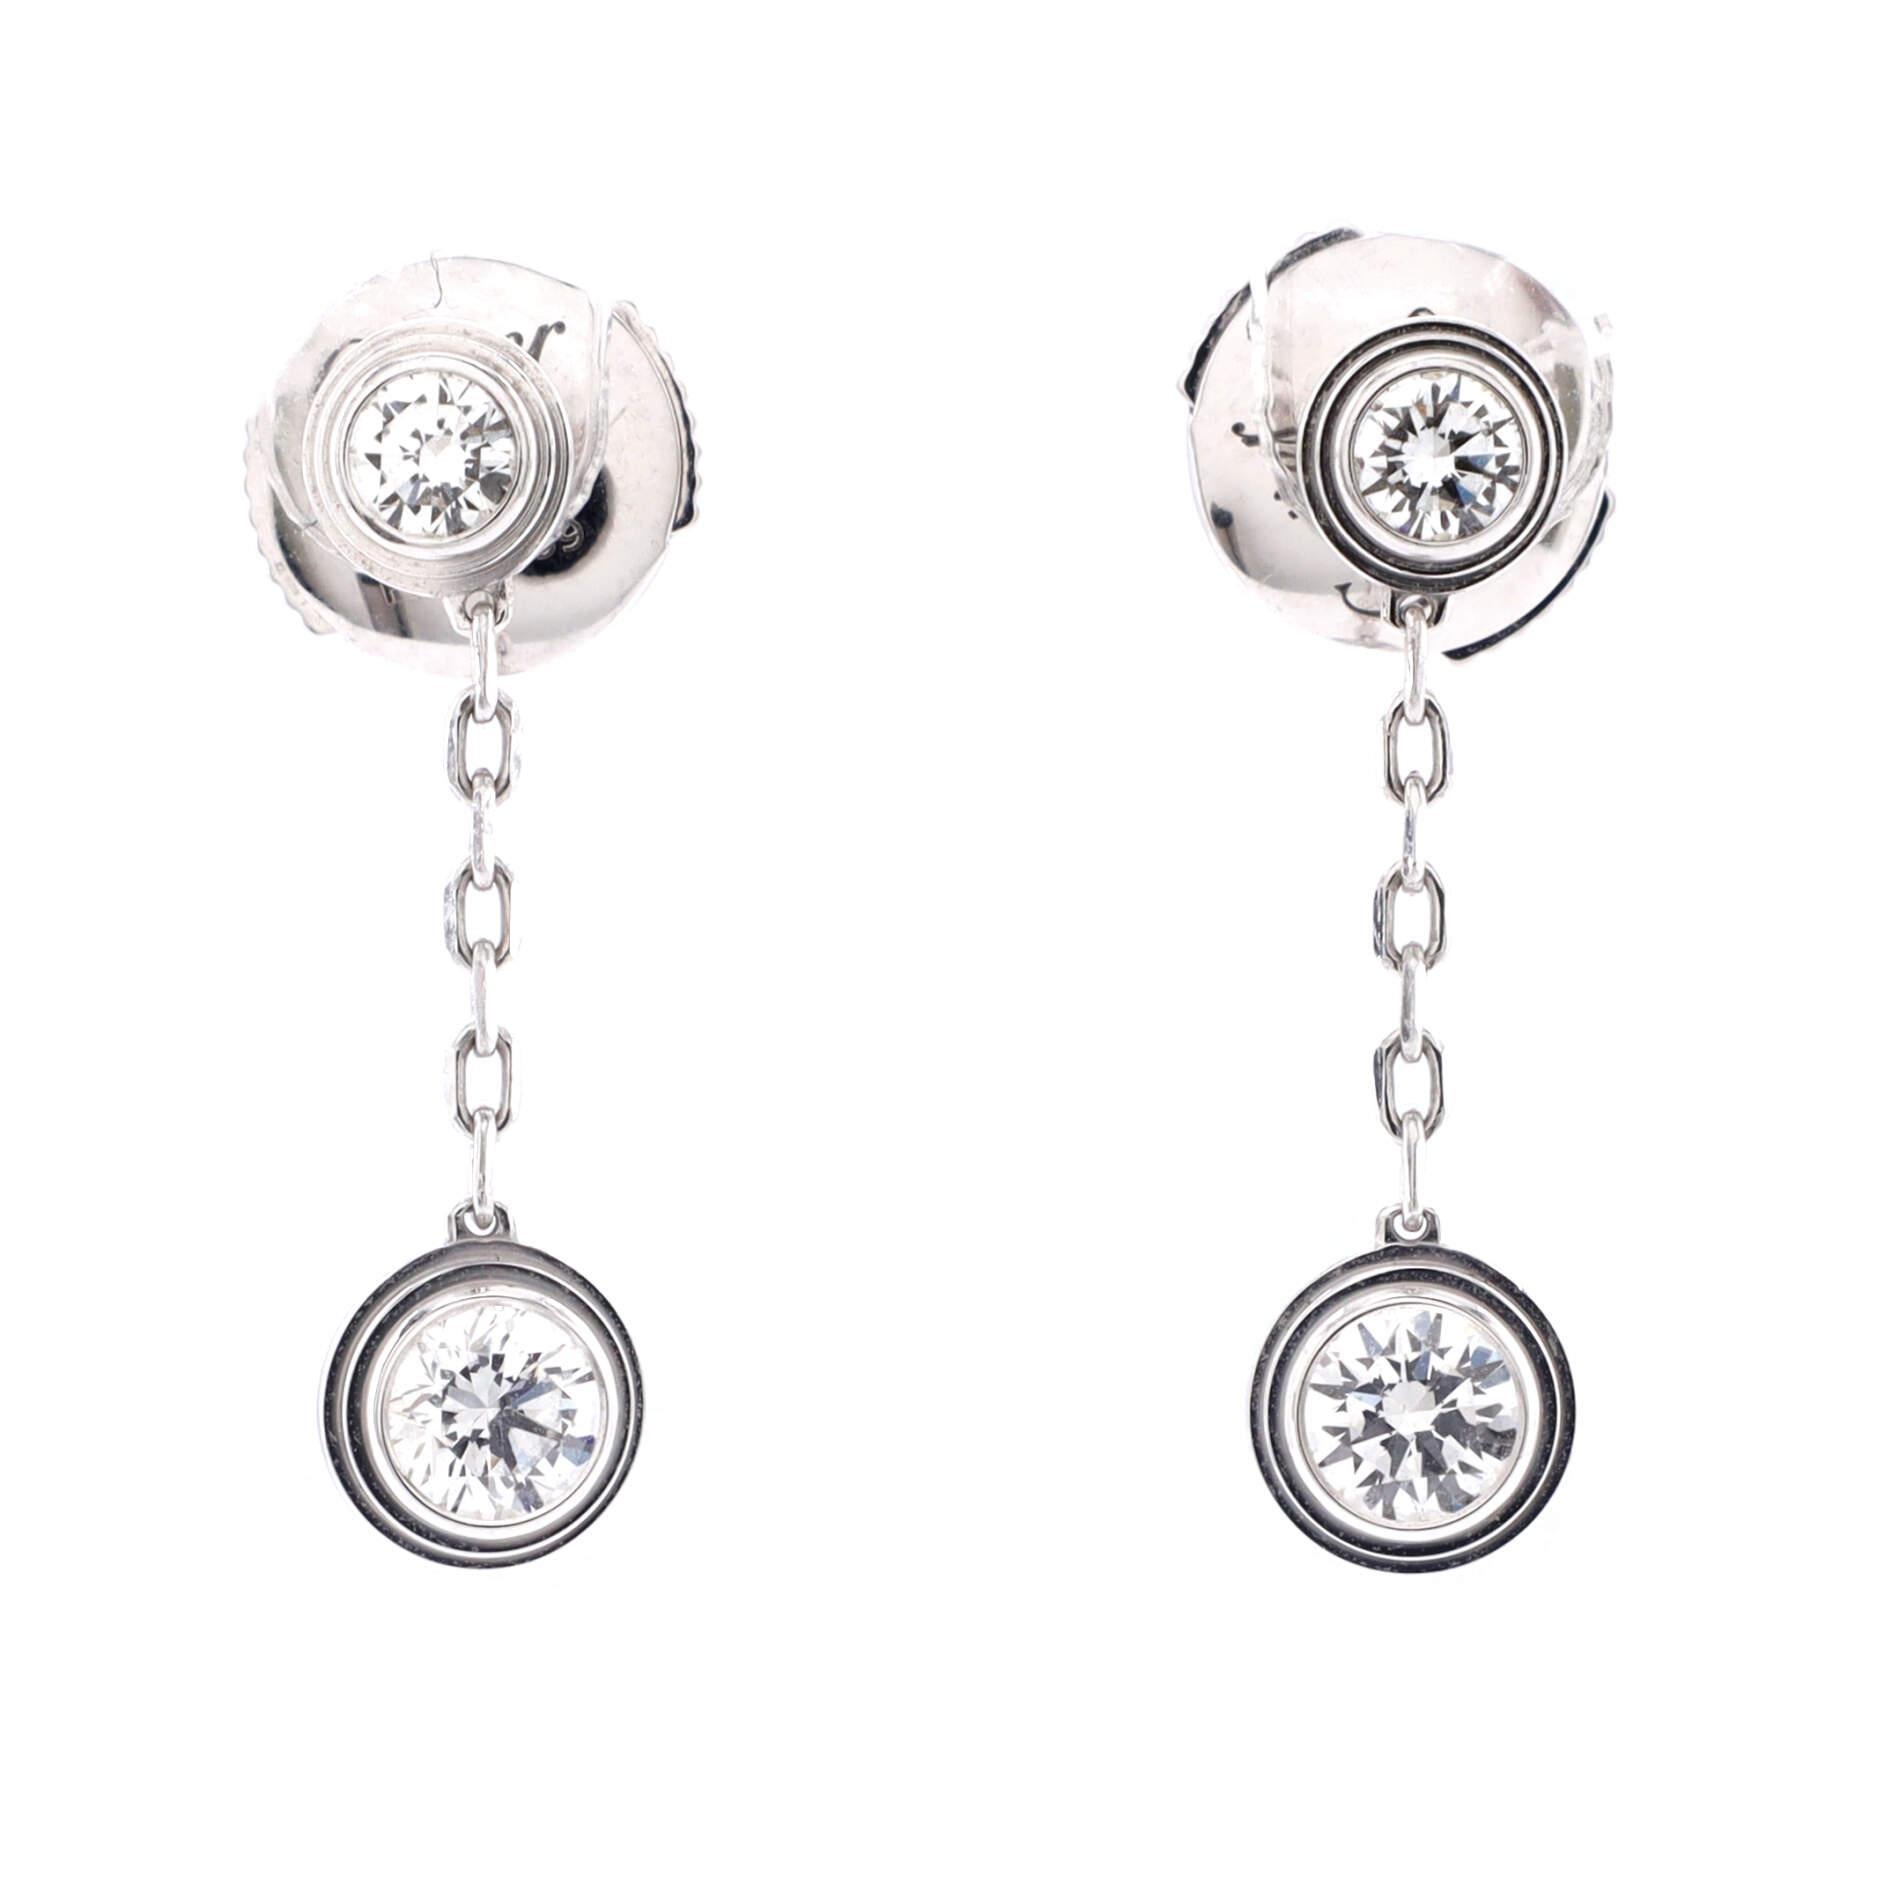 Condition: Great. Minor wear throughout.
Accessories: No Accessories
Measurements: Height/Length: 20.00 mm, Width: 5.45 mm
Designer: Cartier
Model: D'Amour Drop Earrings 18K White Gold and Diamonds
Exterior Color: White Gold
Item Number: 184294/362